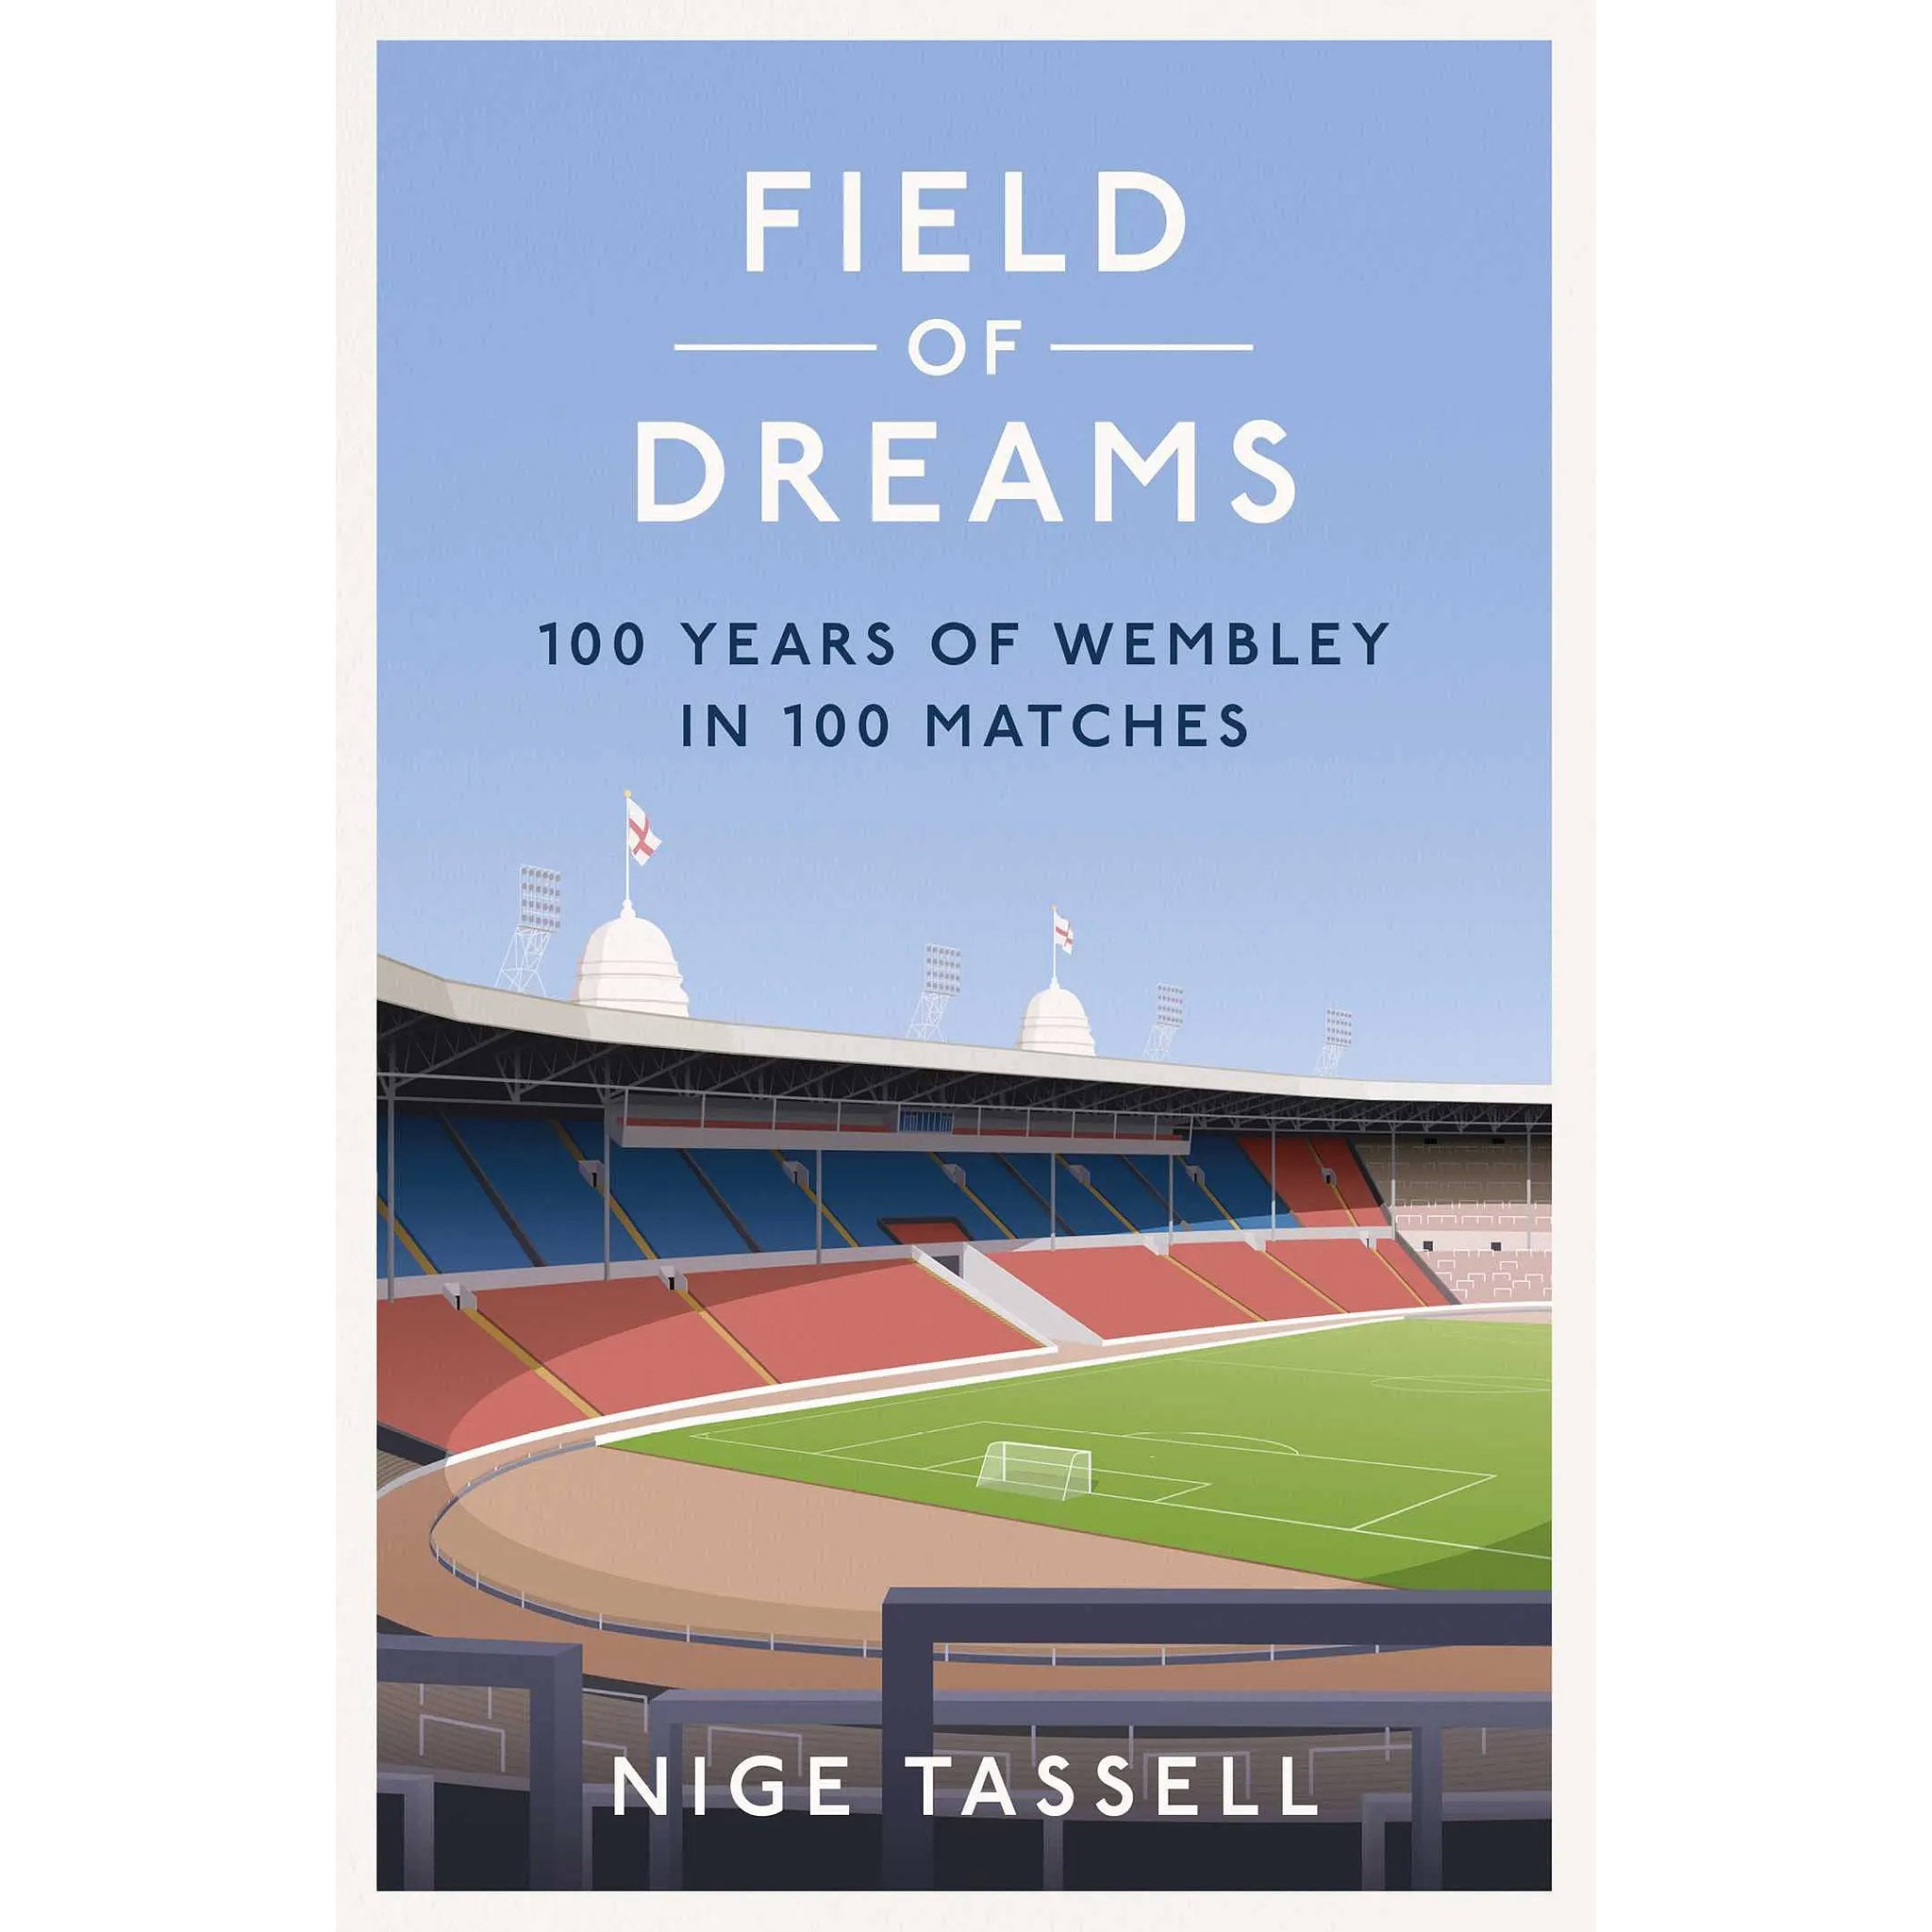 Field of Dreams – 100 Years of Wembley in 100 Matches